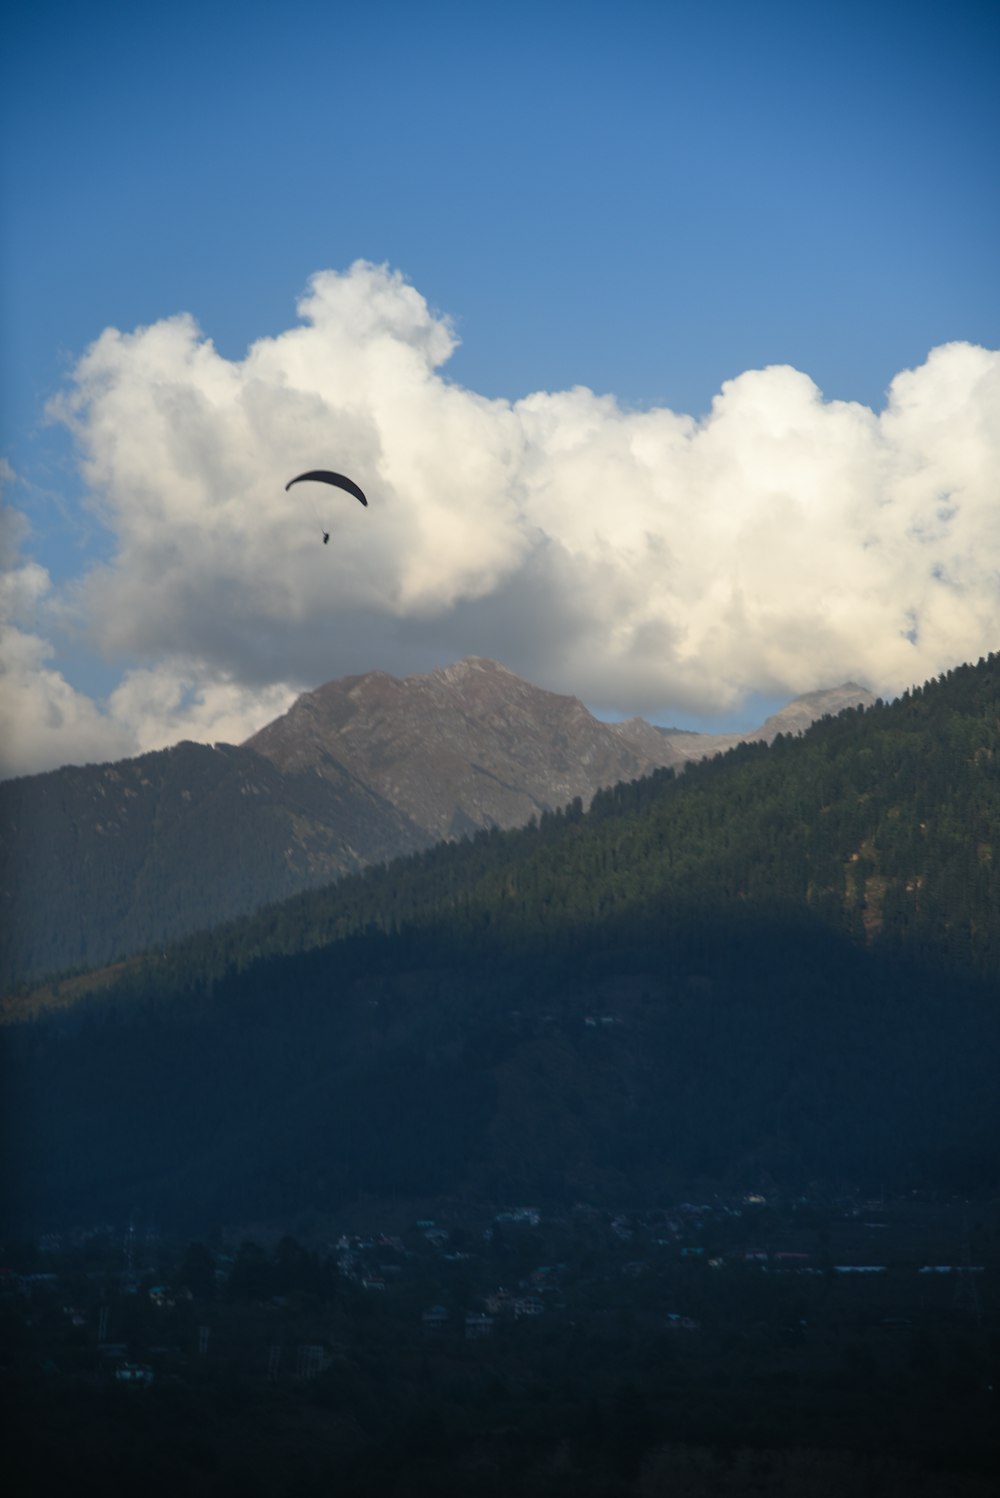 a paraglider is flying over a mountainous area